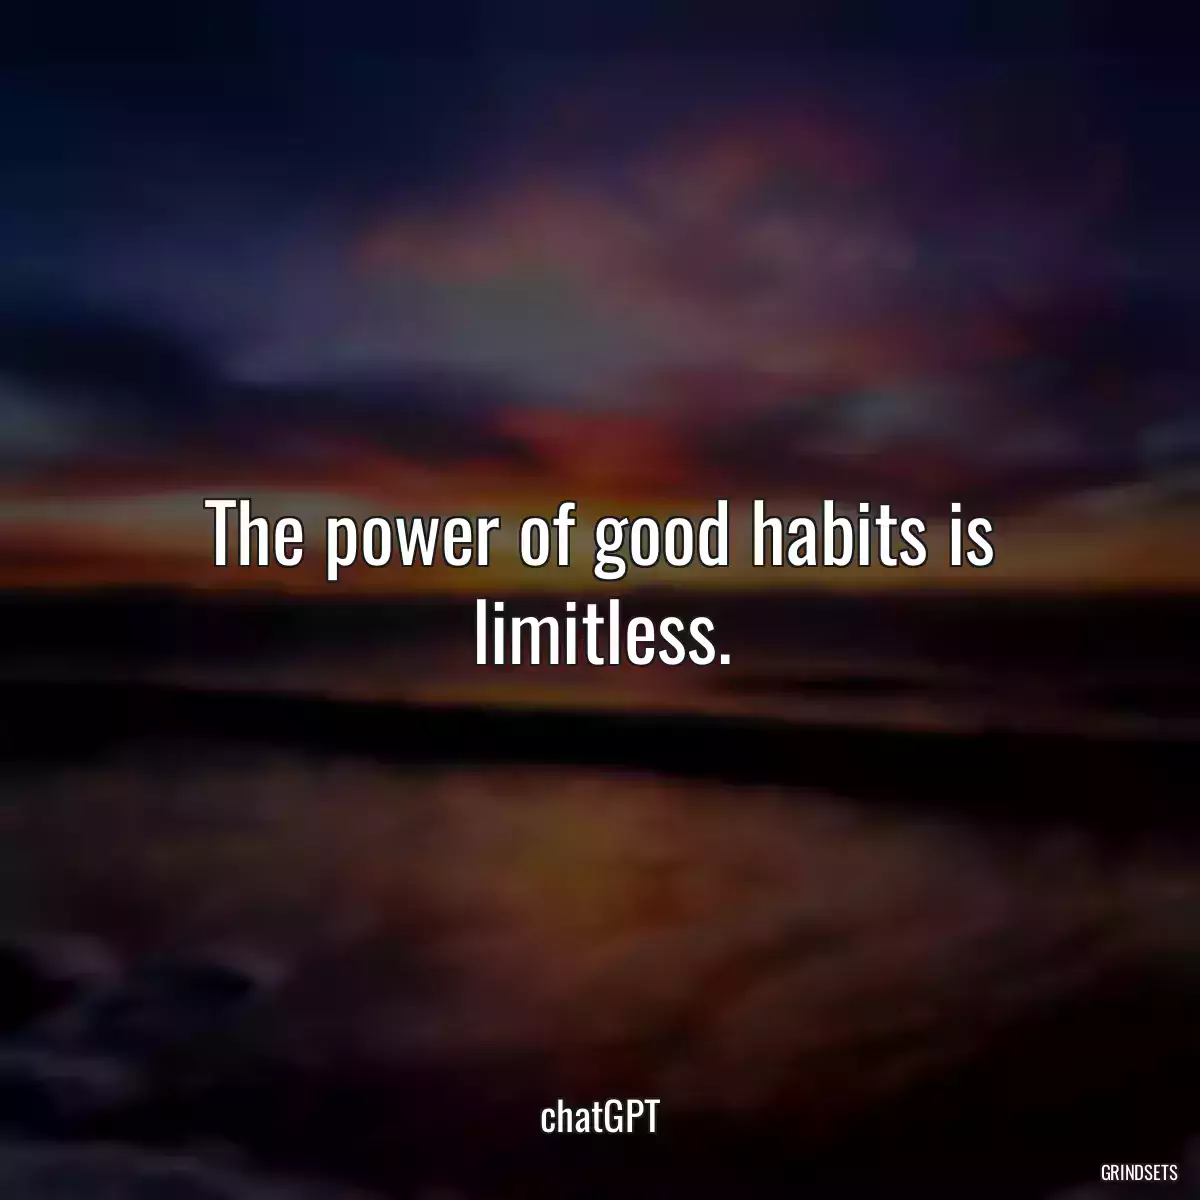 The power of good habits is limitless.